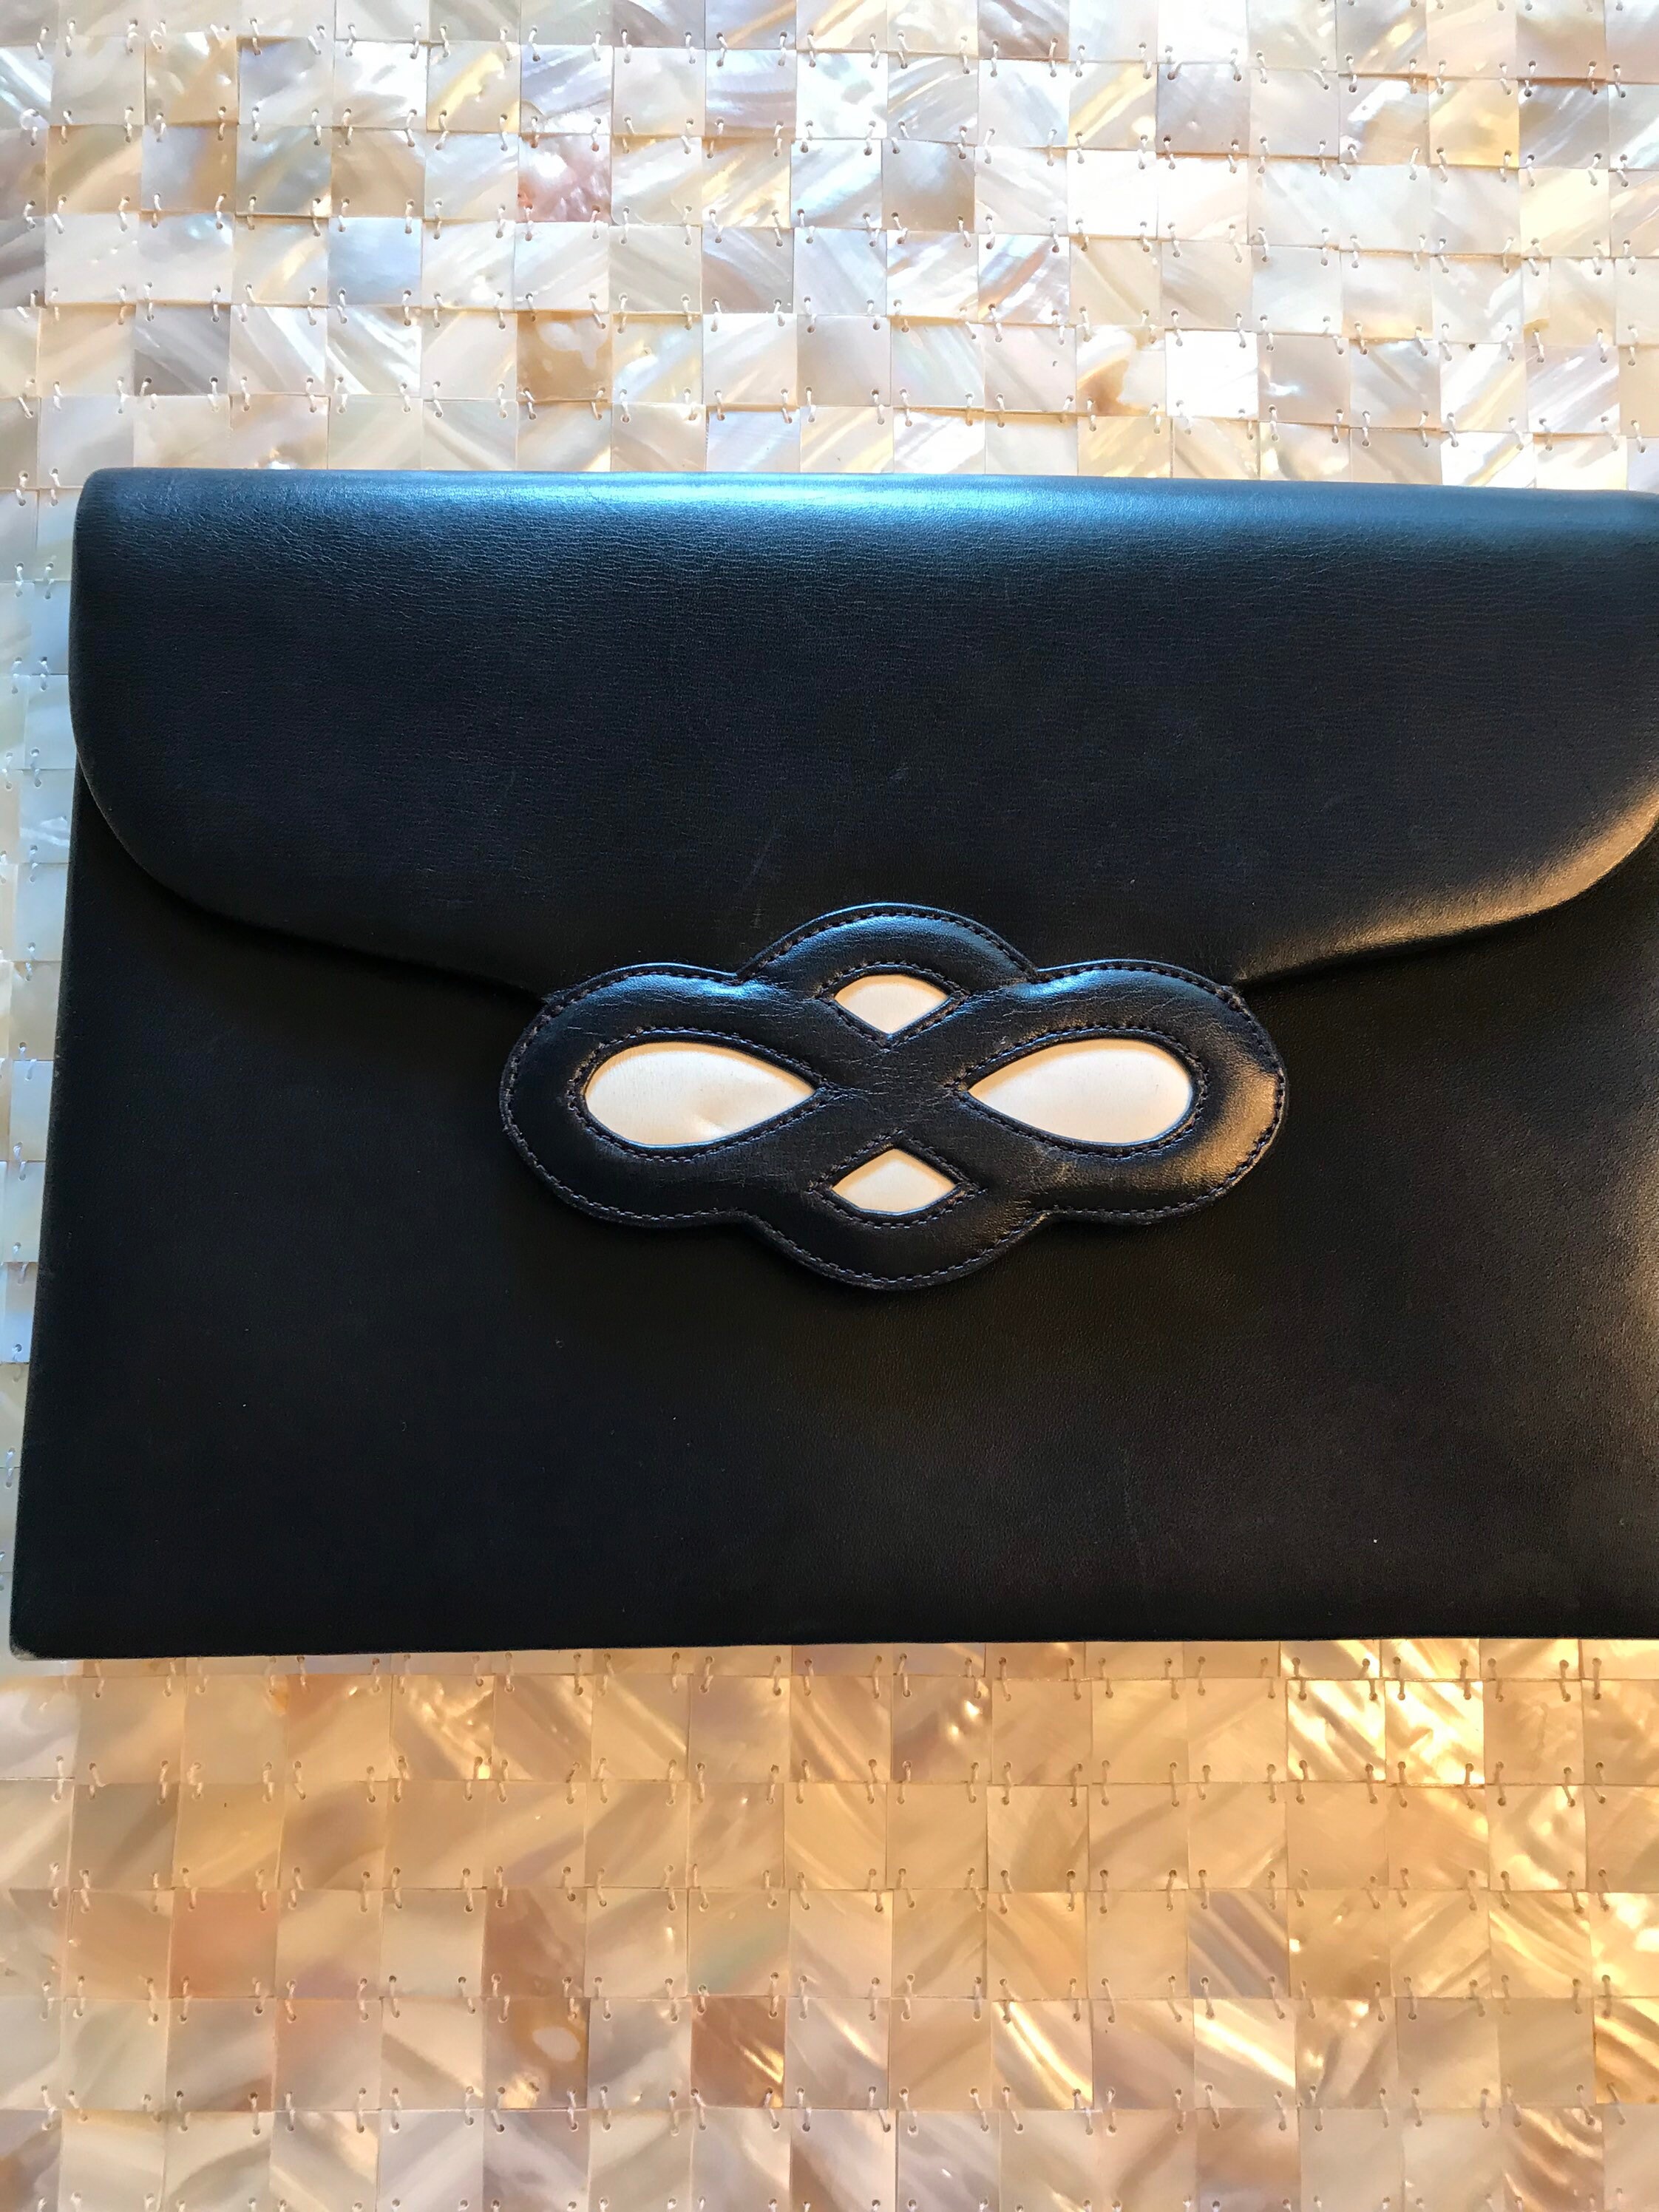 YSL Monogram Clutch ( With Grommets + Gold or Silver Chain )